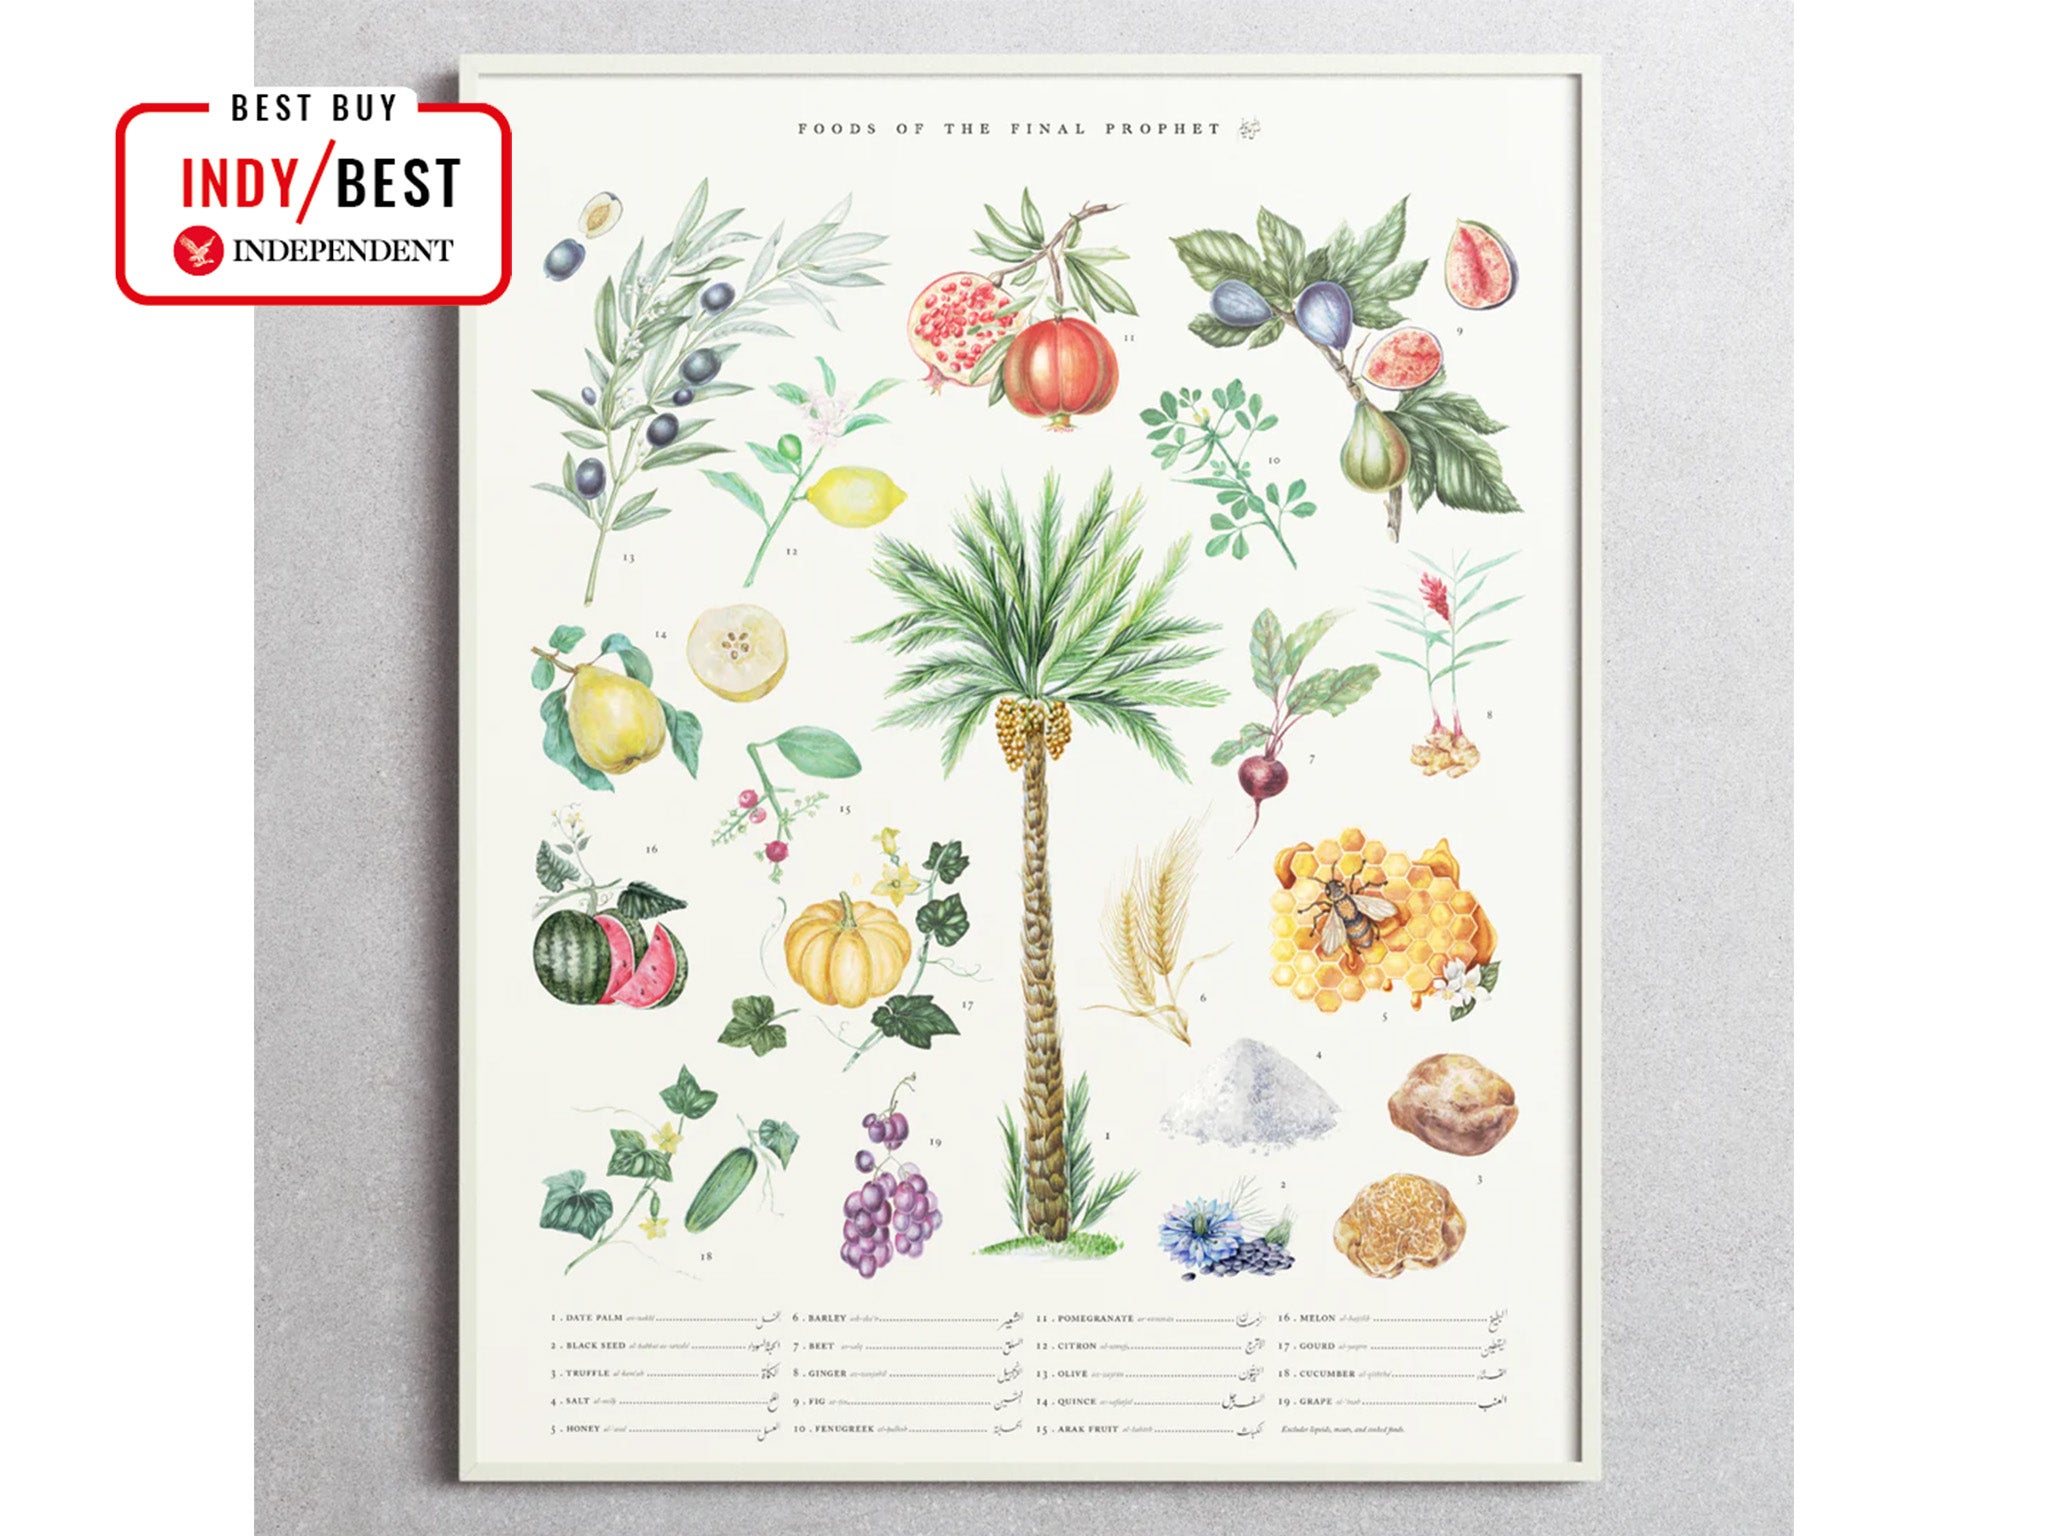 The Silsila Foods of the Final Prophet – a botanical print poster